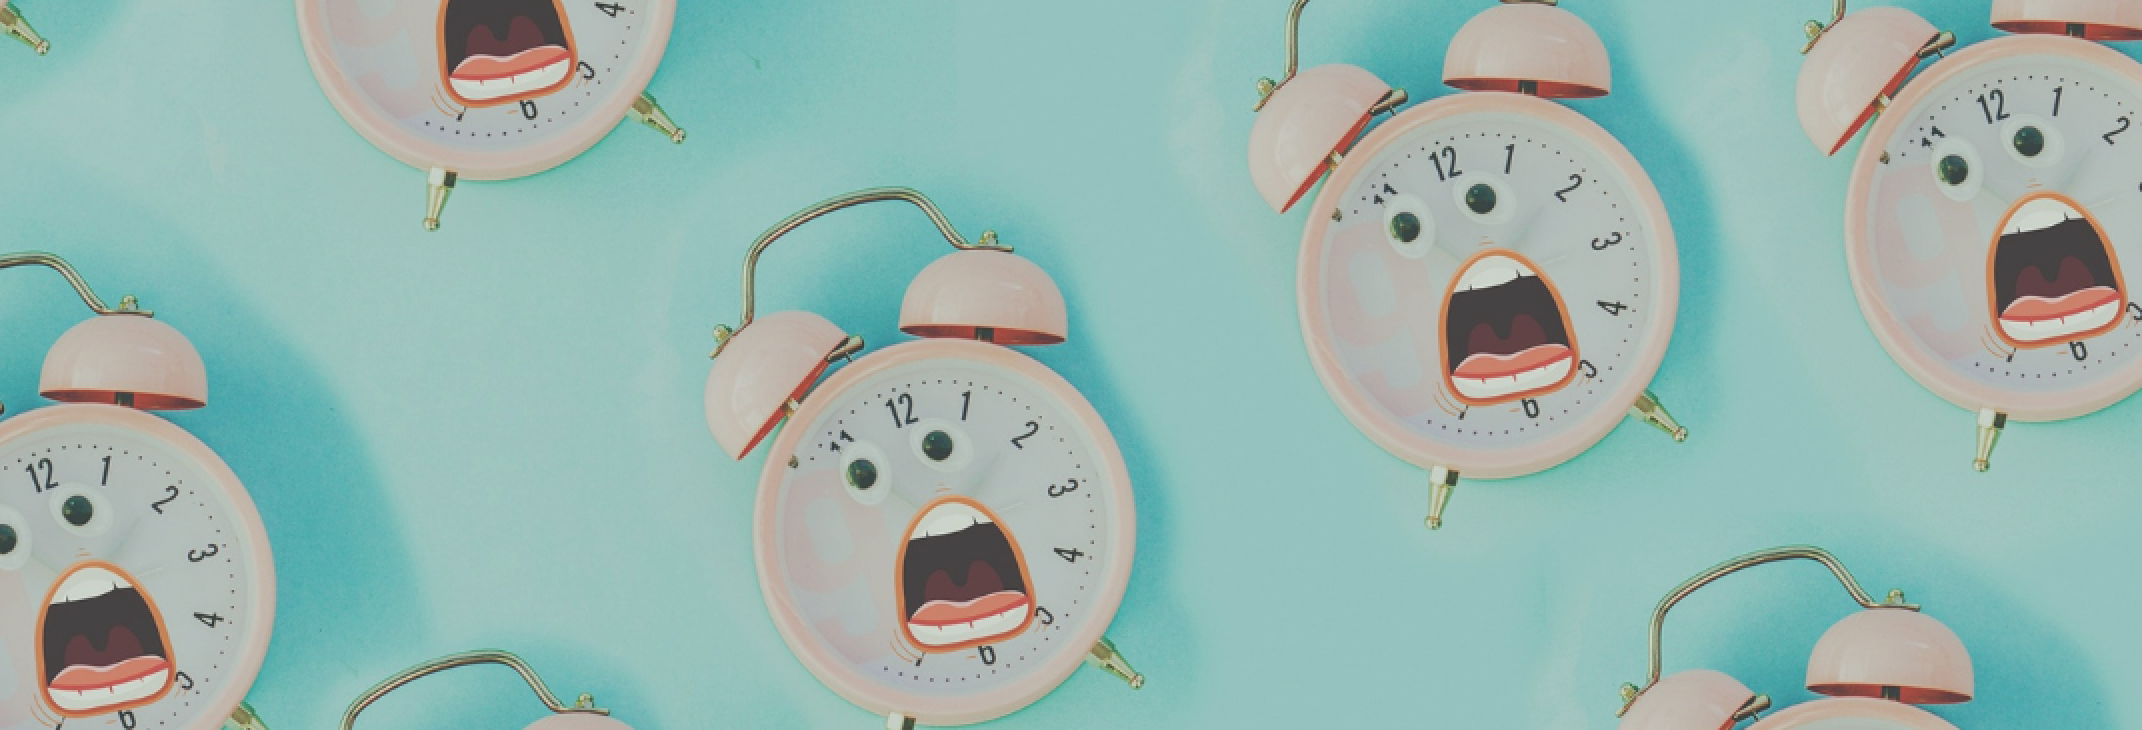 Clock Faces with mouths open